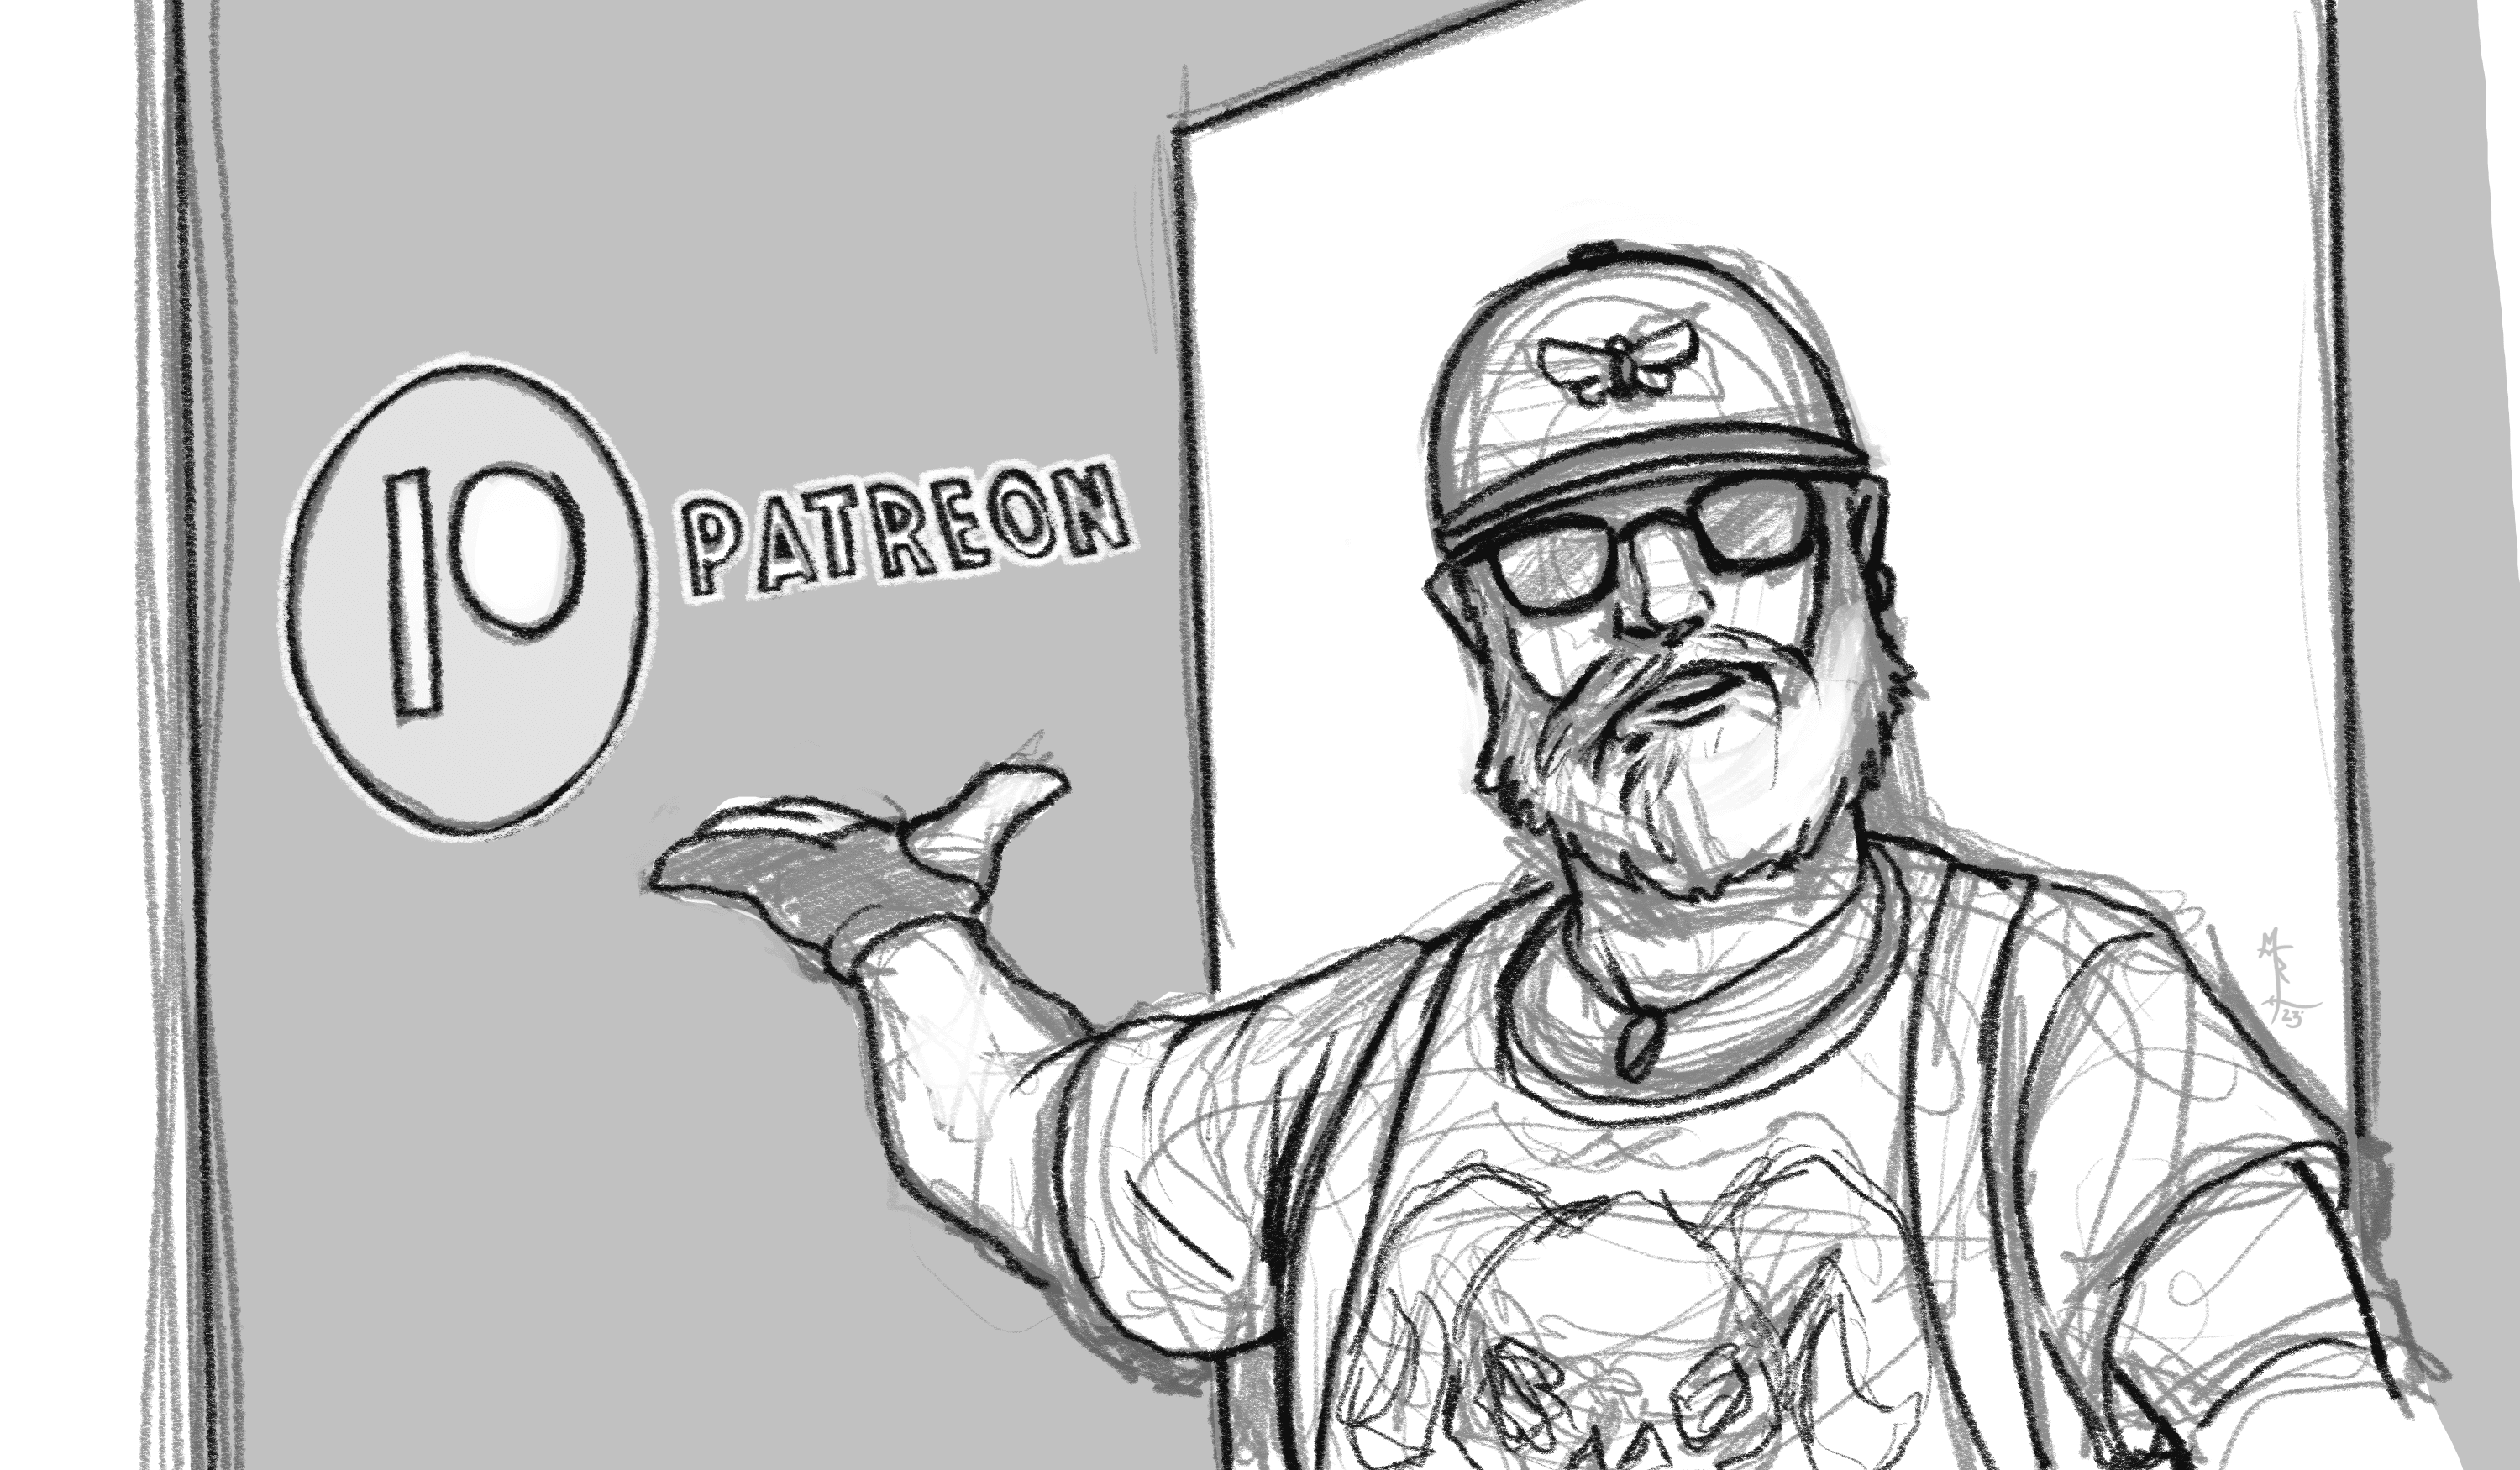 A rough sketch of the artist welcoming you to view some of their patreon artwork for free.